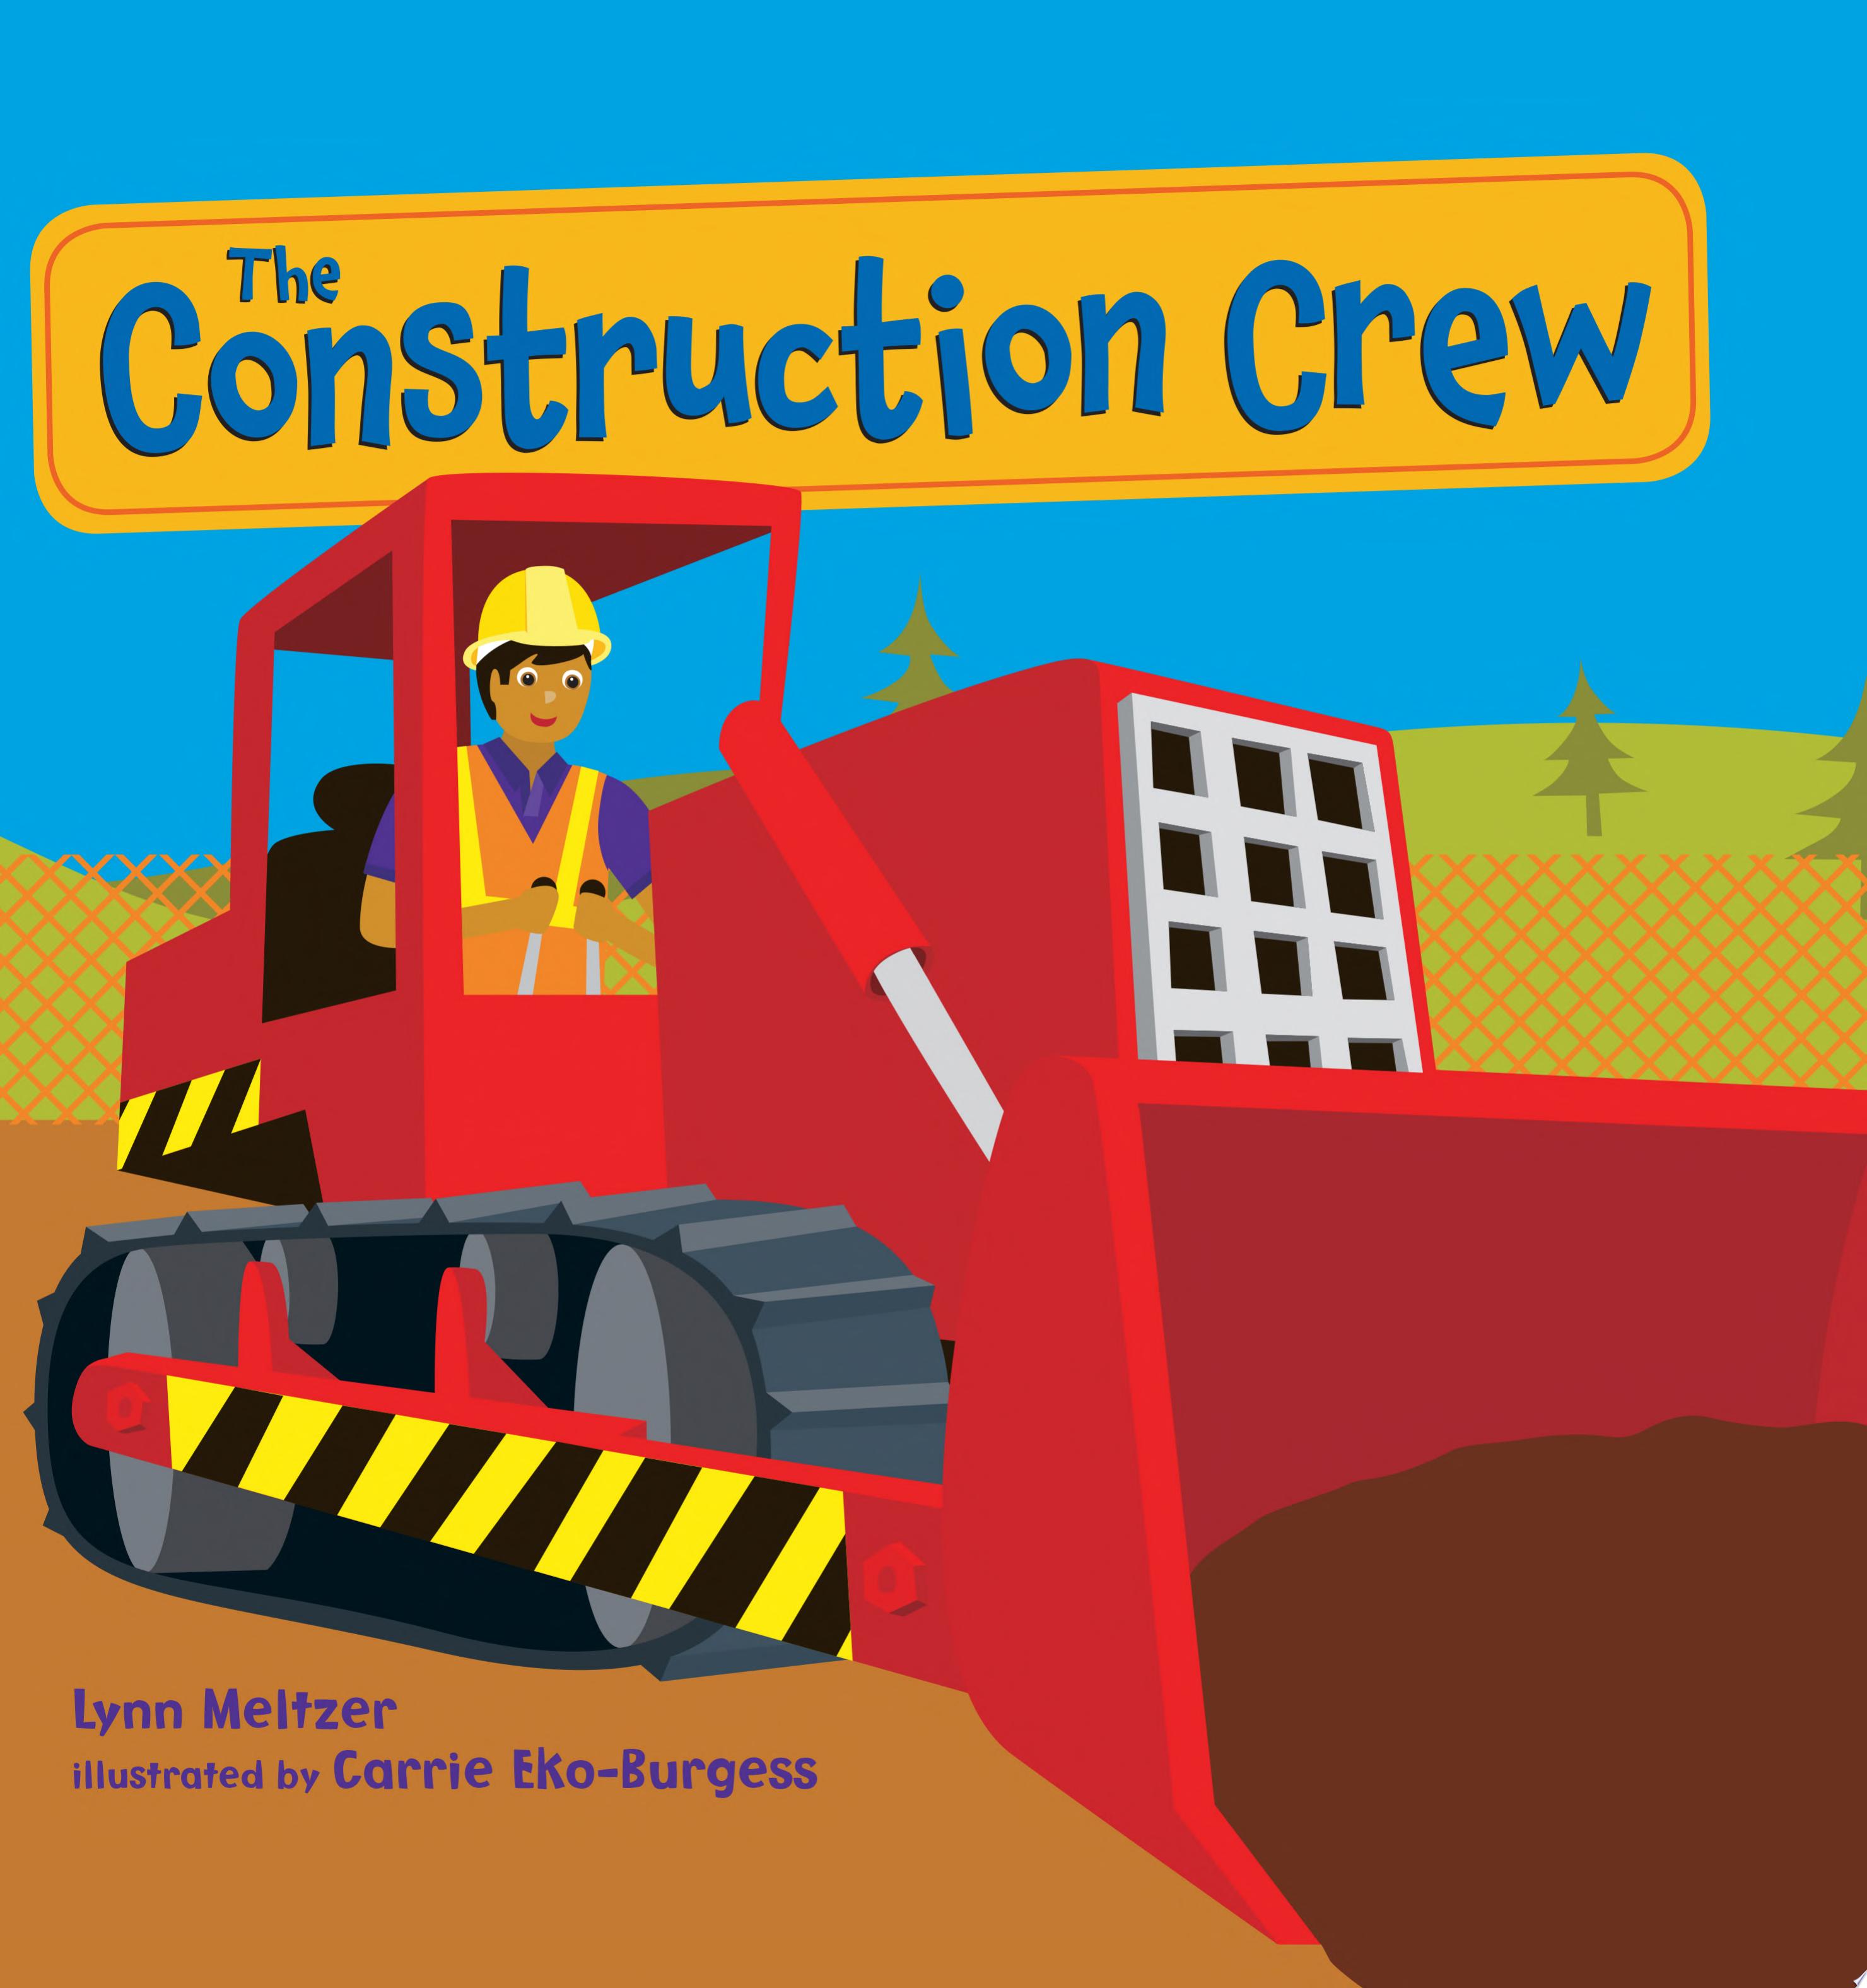 Image for "The Construction Crew"